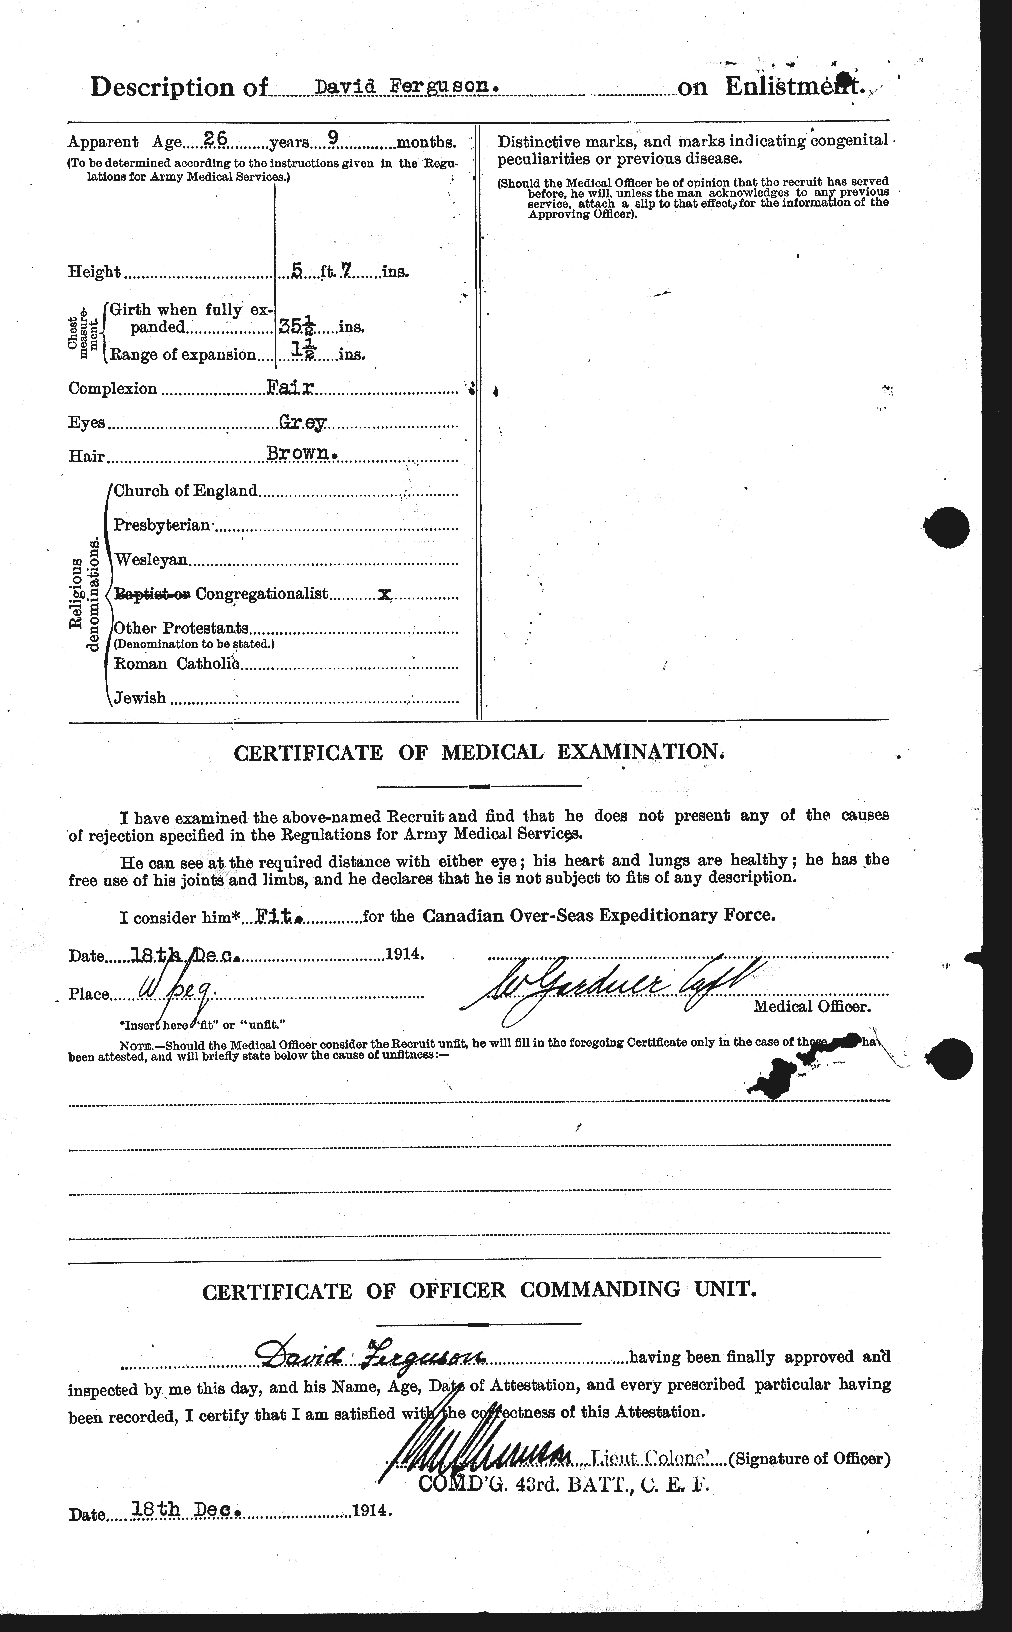 Personnel Records of the First World War - CEF 318983b